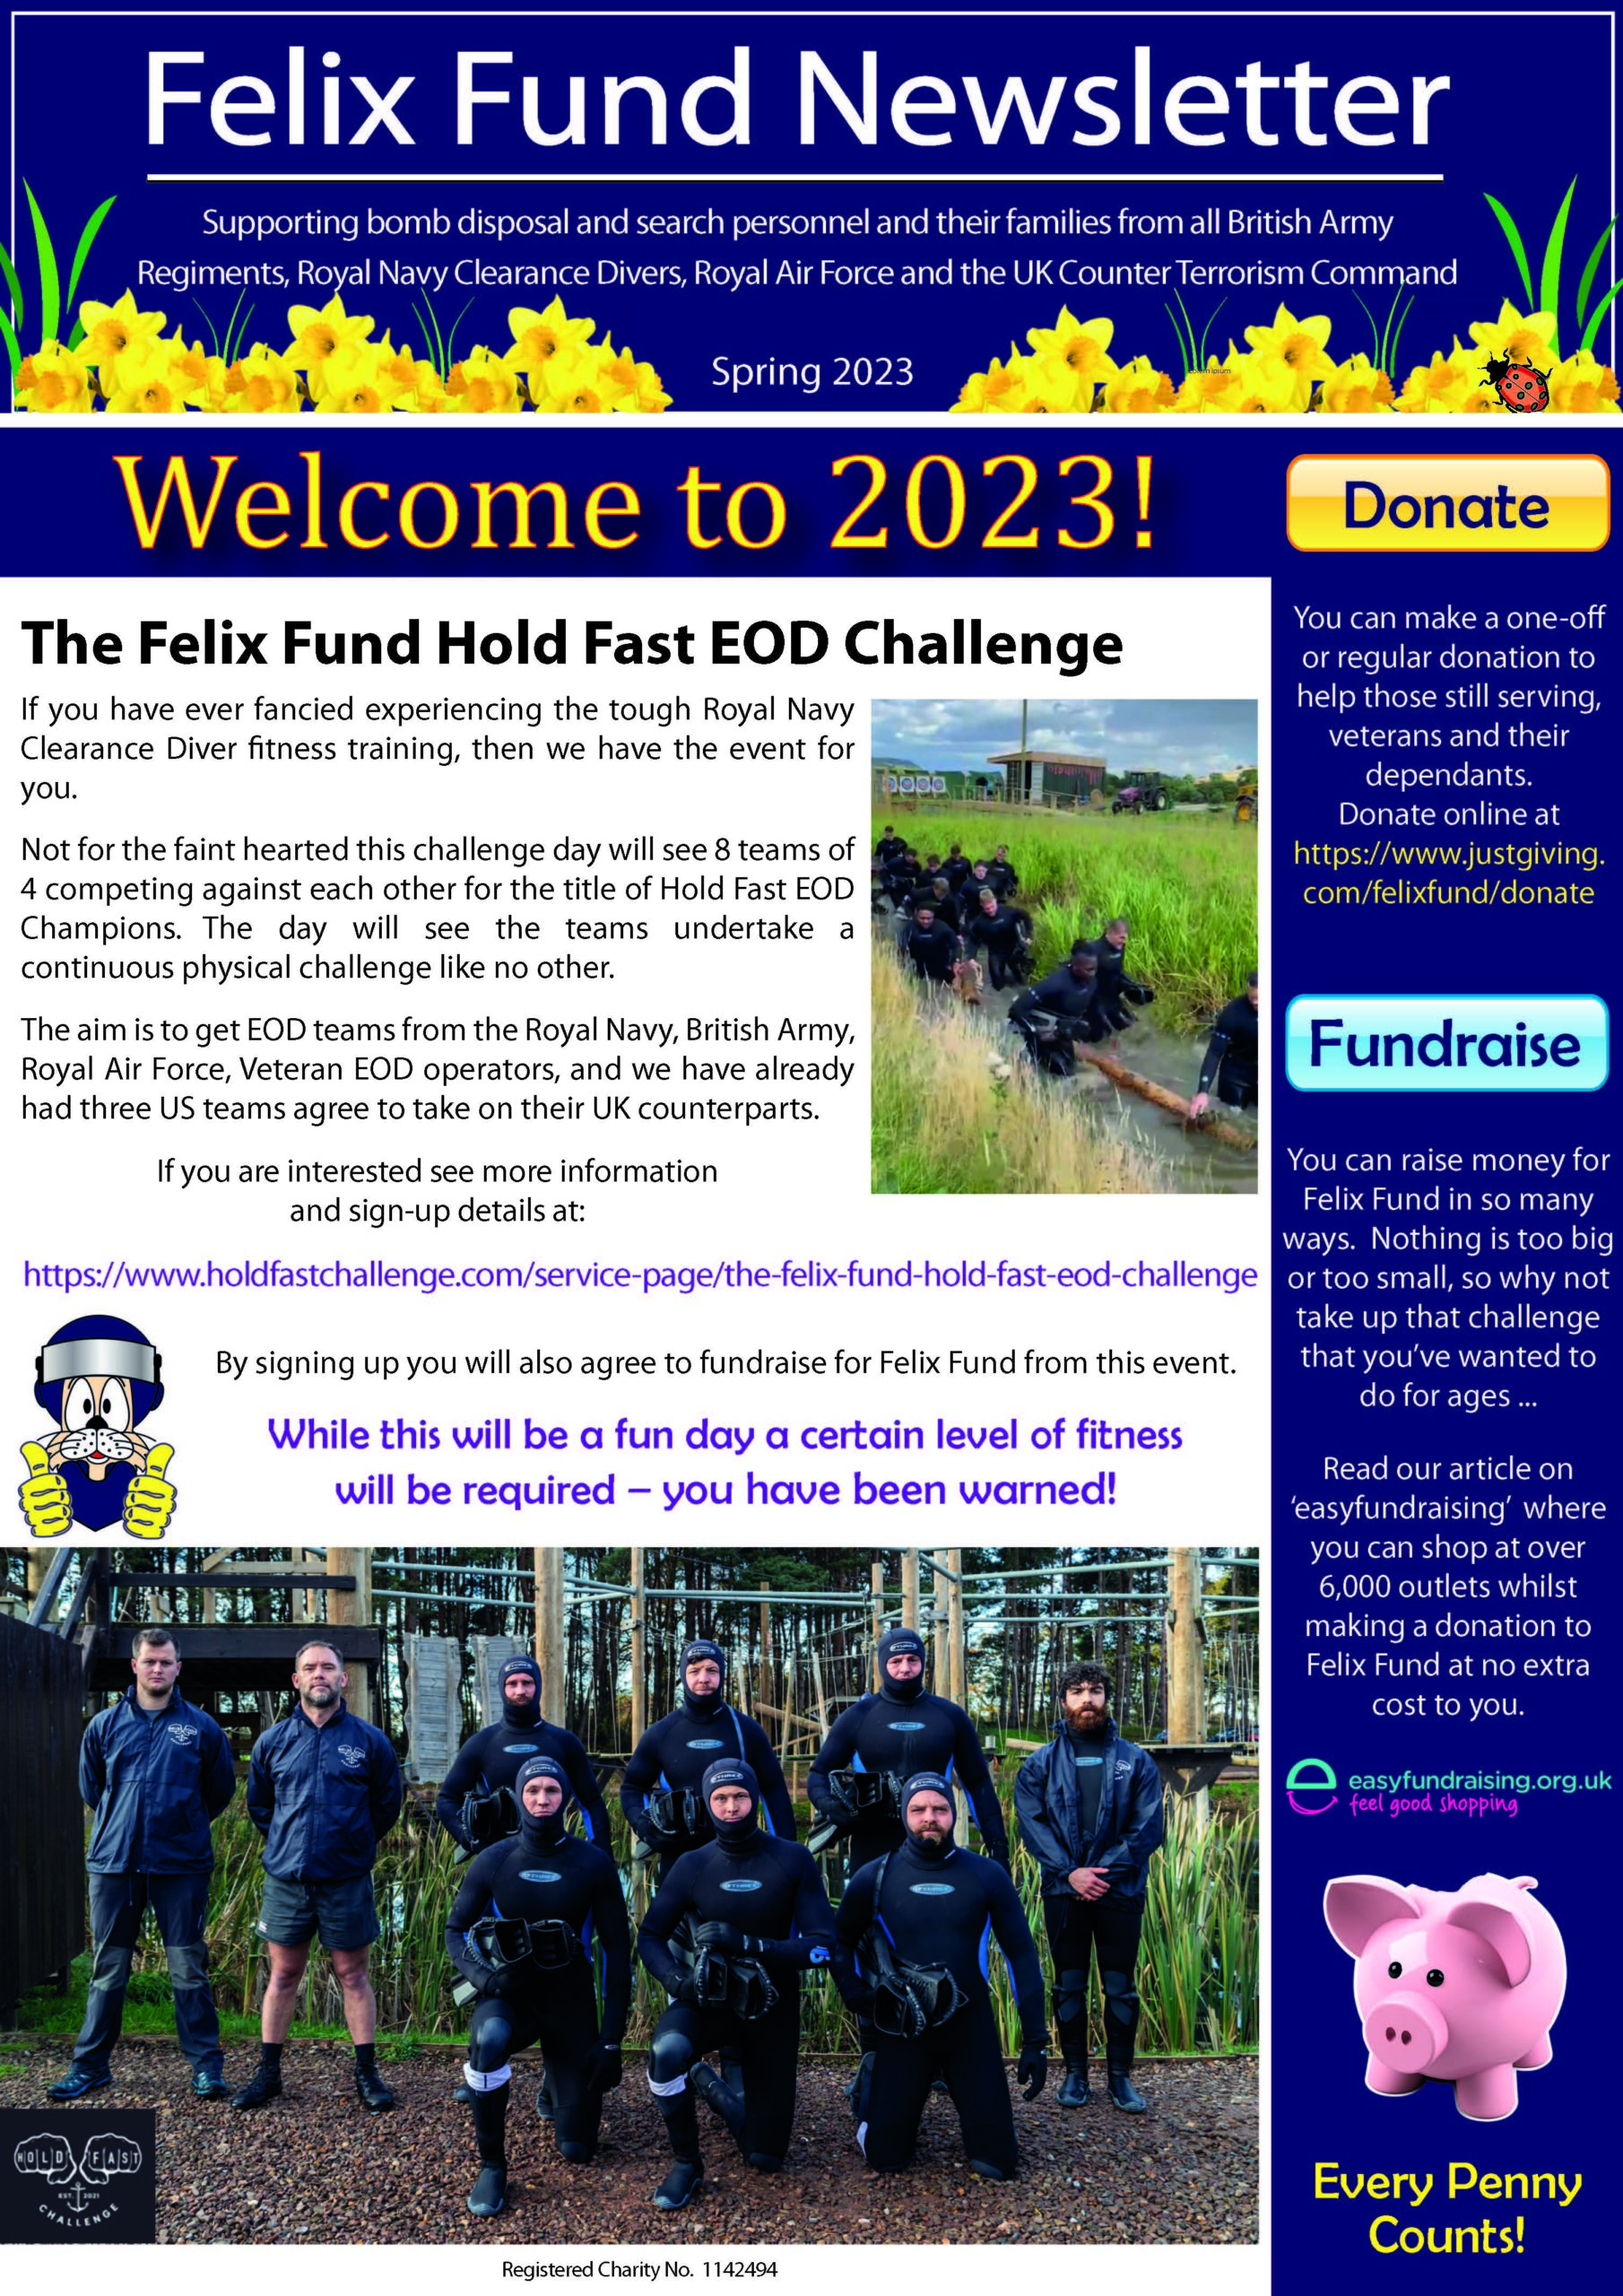 Front page of Spring 2023 Newsletter